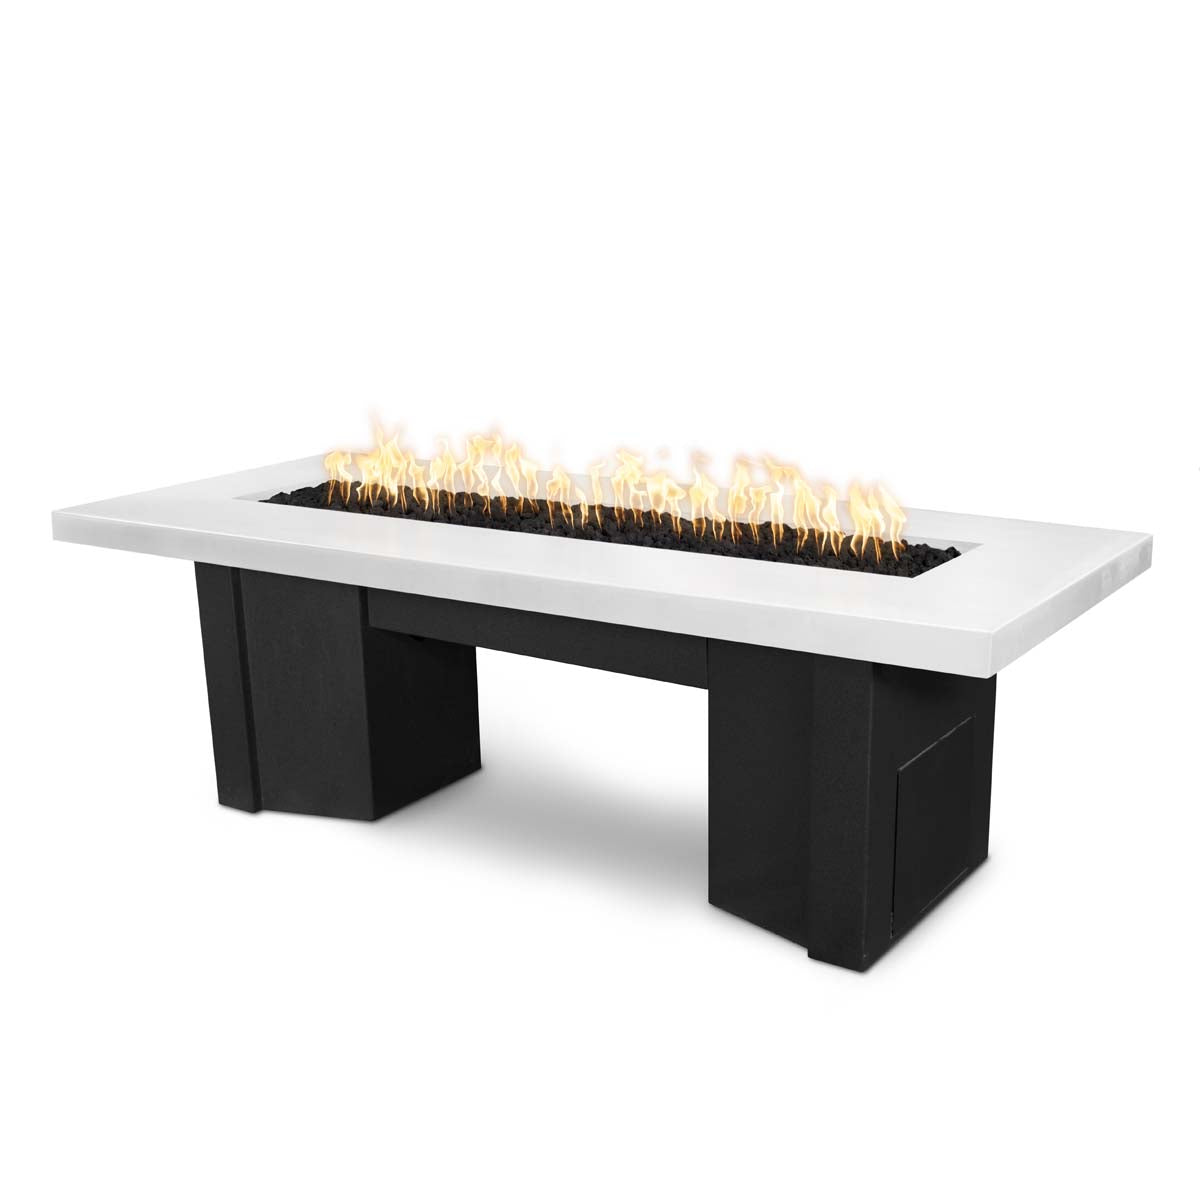 The Outdoor Plus Rectangular Alameda 78" Black & White Powder Coated Natural Gas Fire Pit with 12V Electronic Ignition